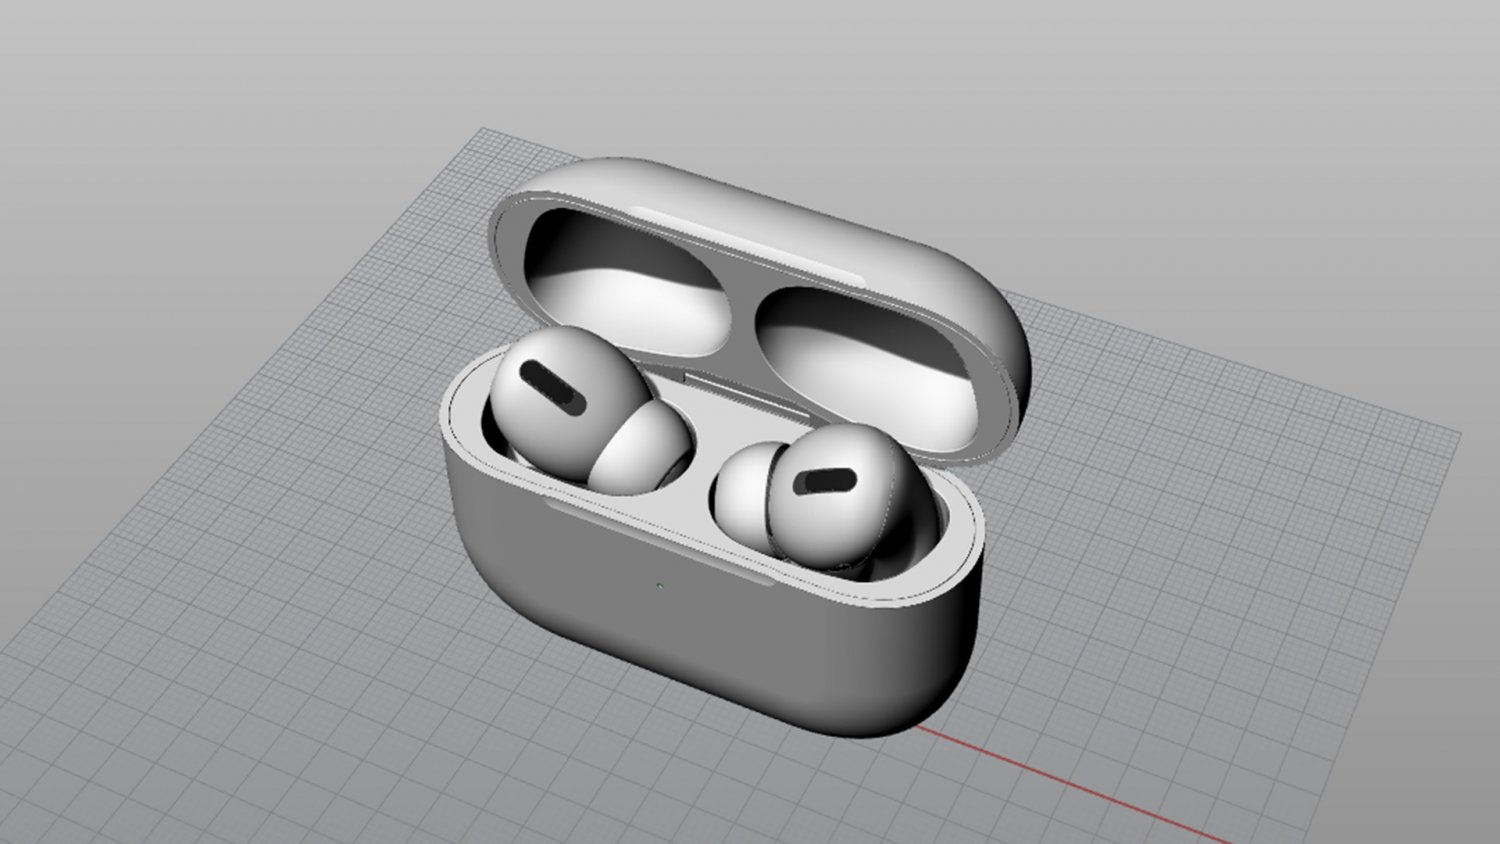 Airpods 3D Model 3D Apple AirPods headphones CGTrader 3d airpods